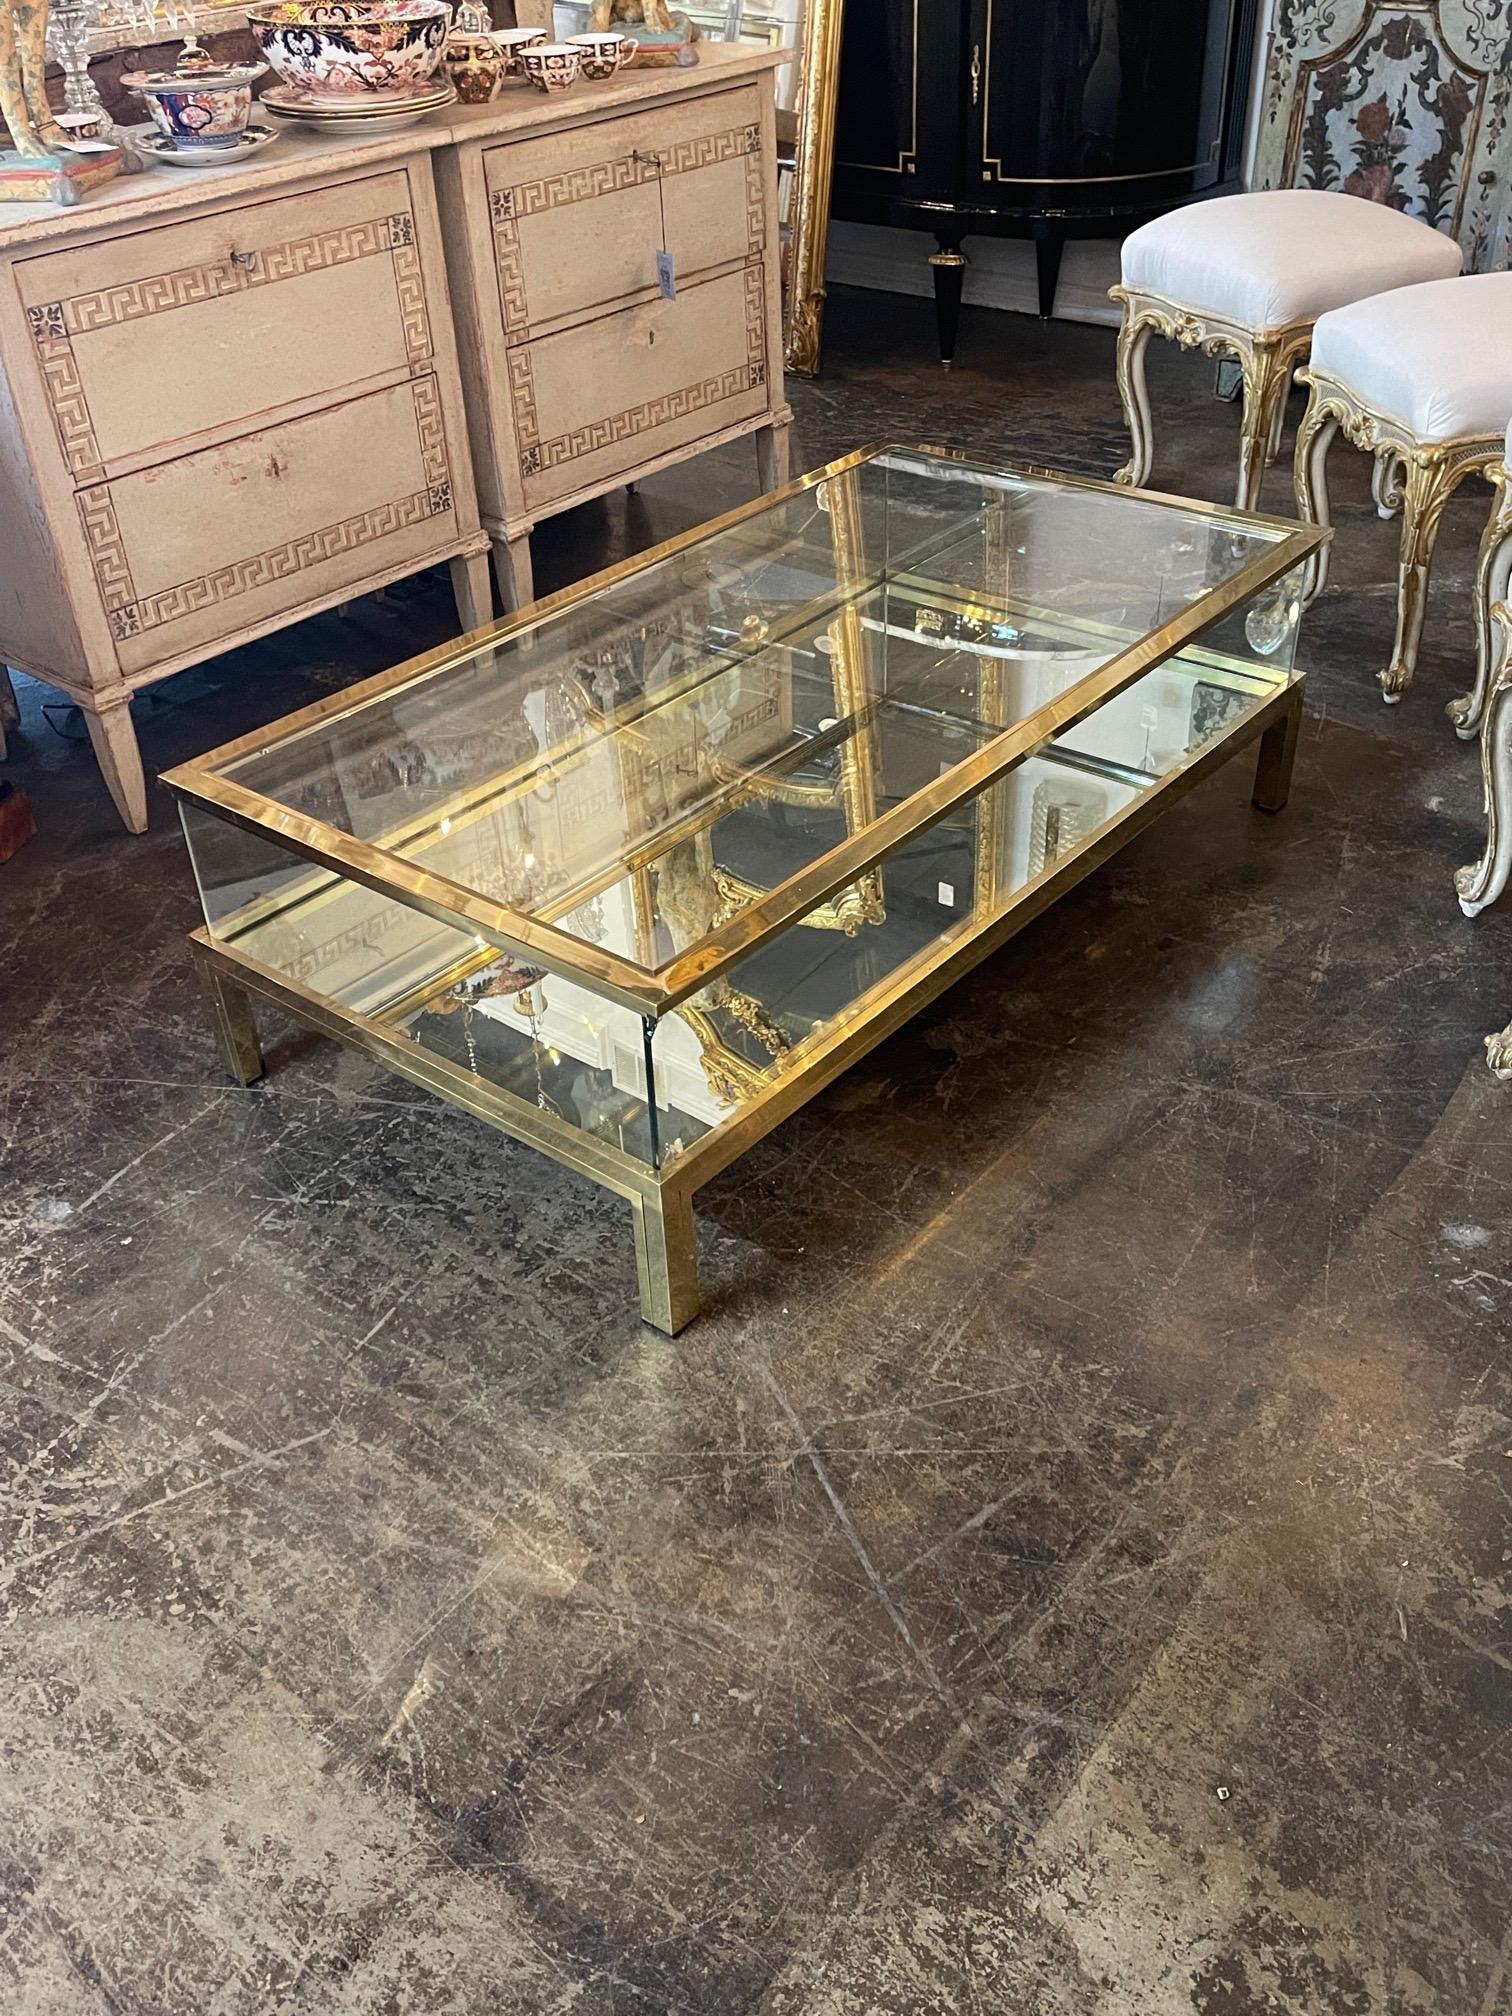 Beautiful French Maison Jansen style case coffee table. The bottom section of glass is mirrored and the top is removeable so the you can put items inside for display if you wish. A lovely and stylish table!